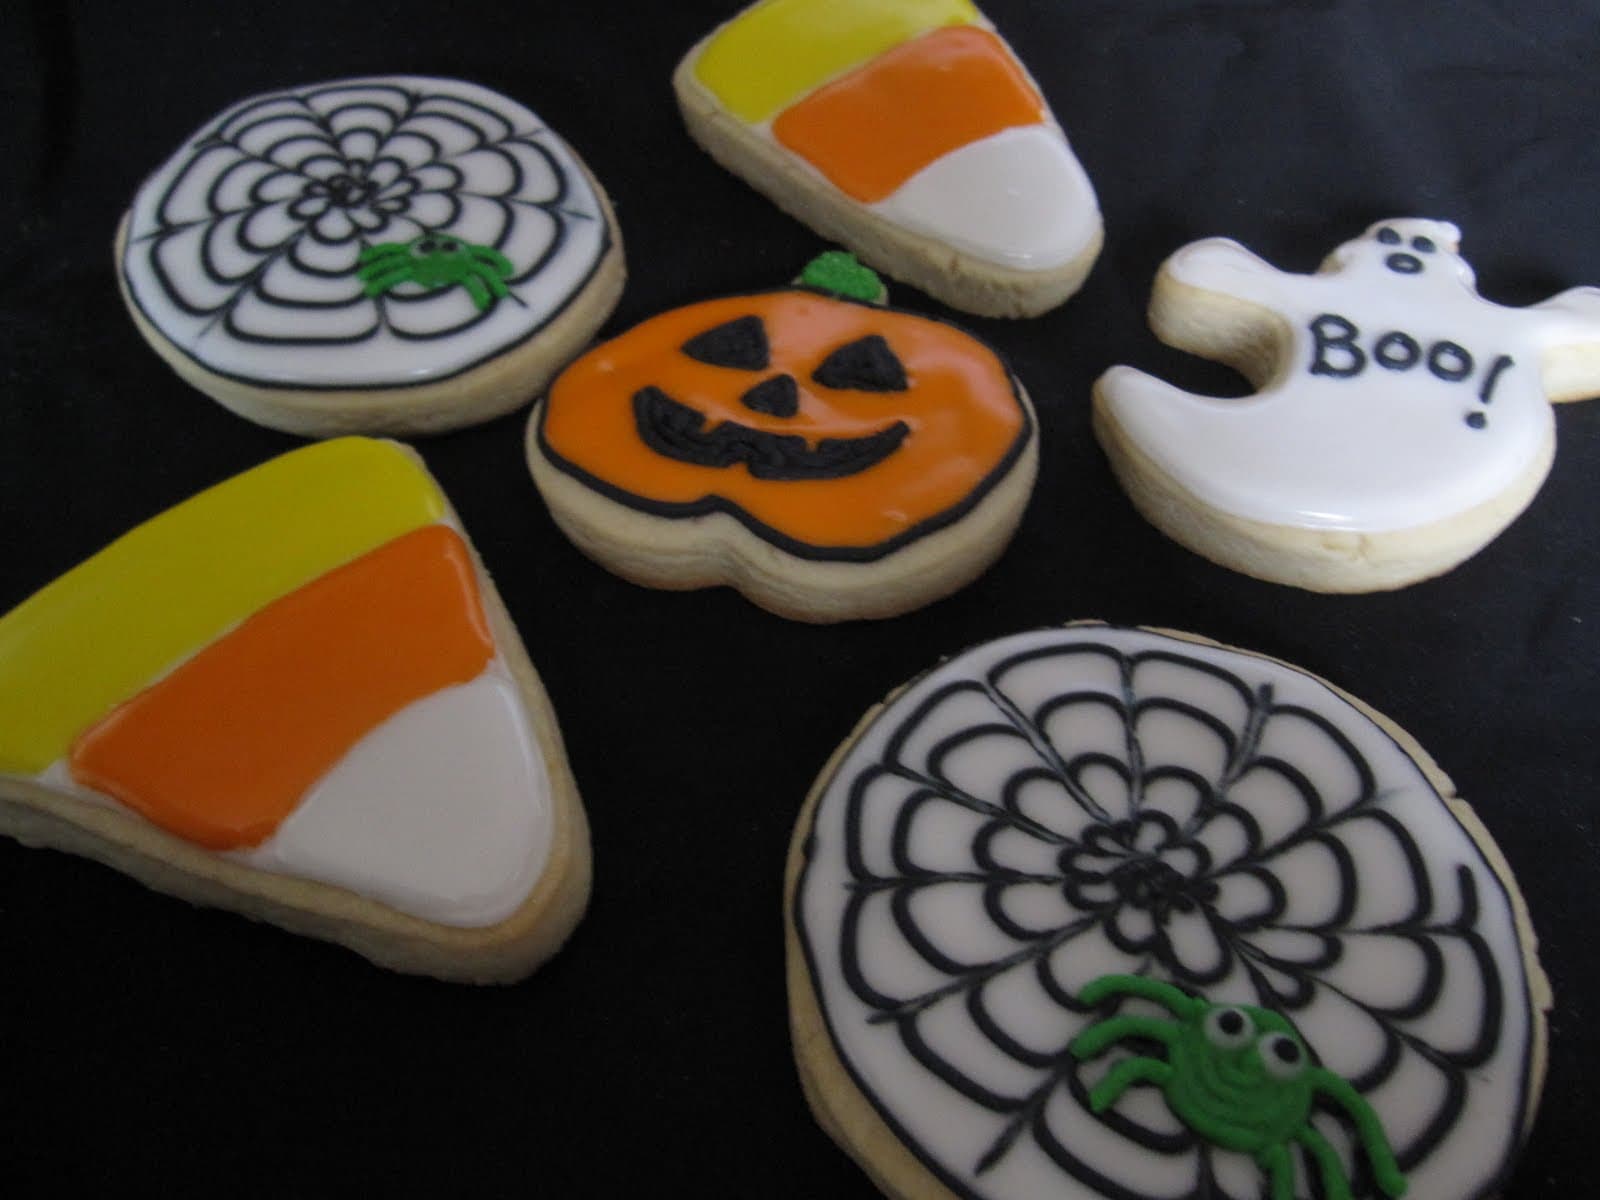 A variety of frosted Halloween-themed cookies